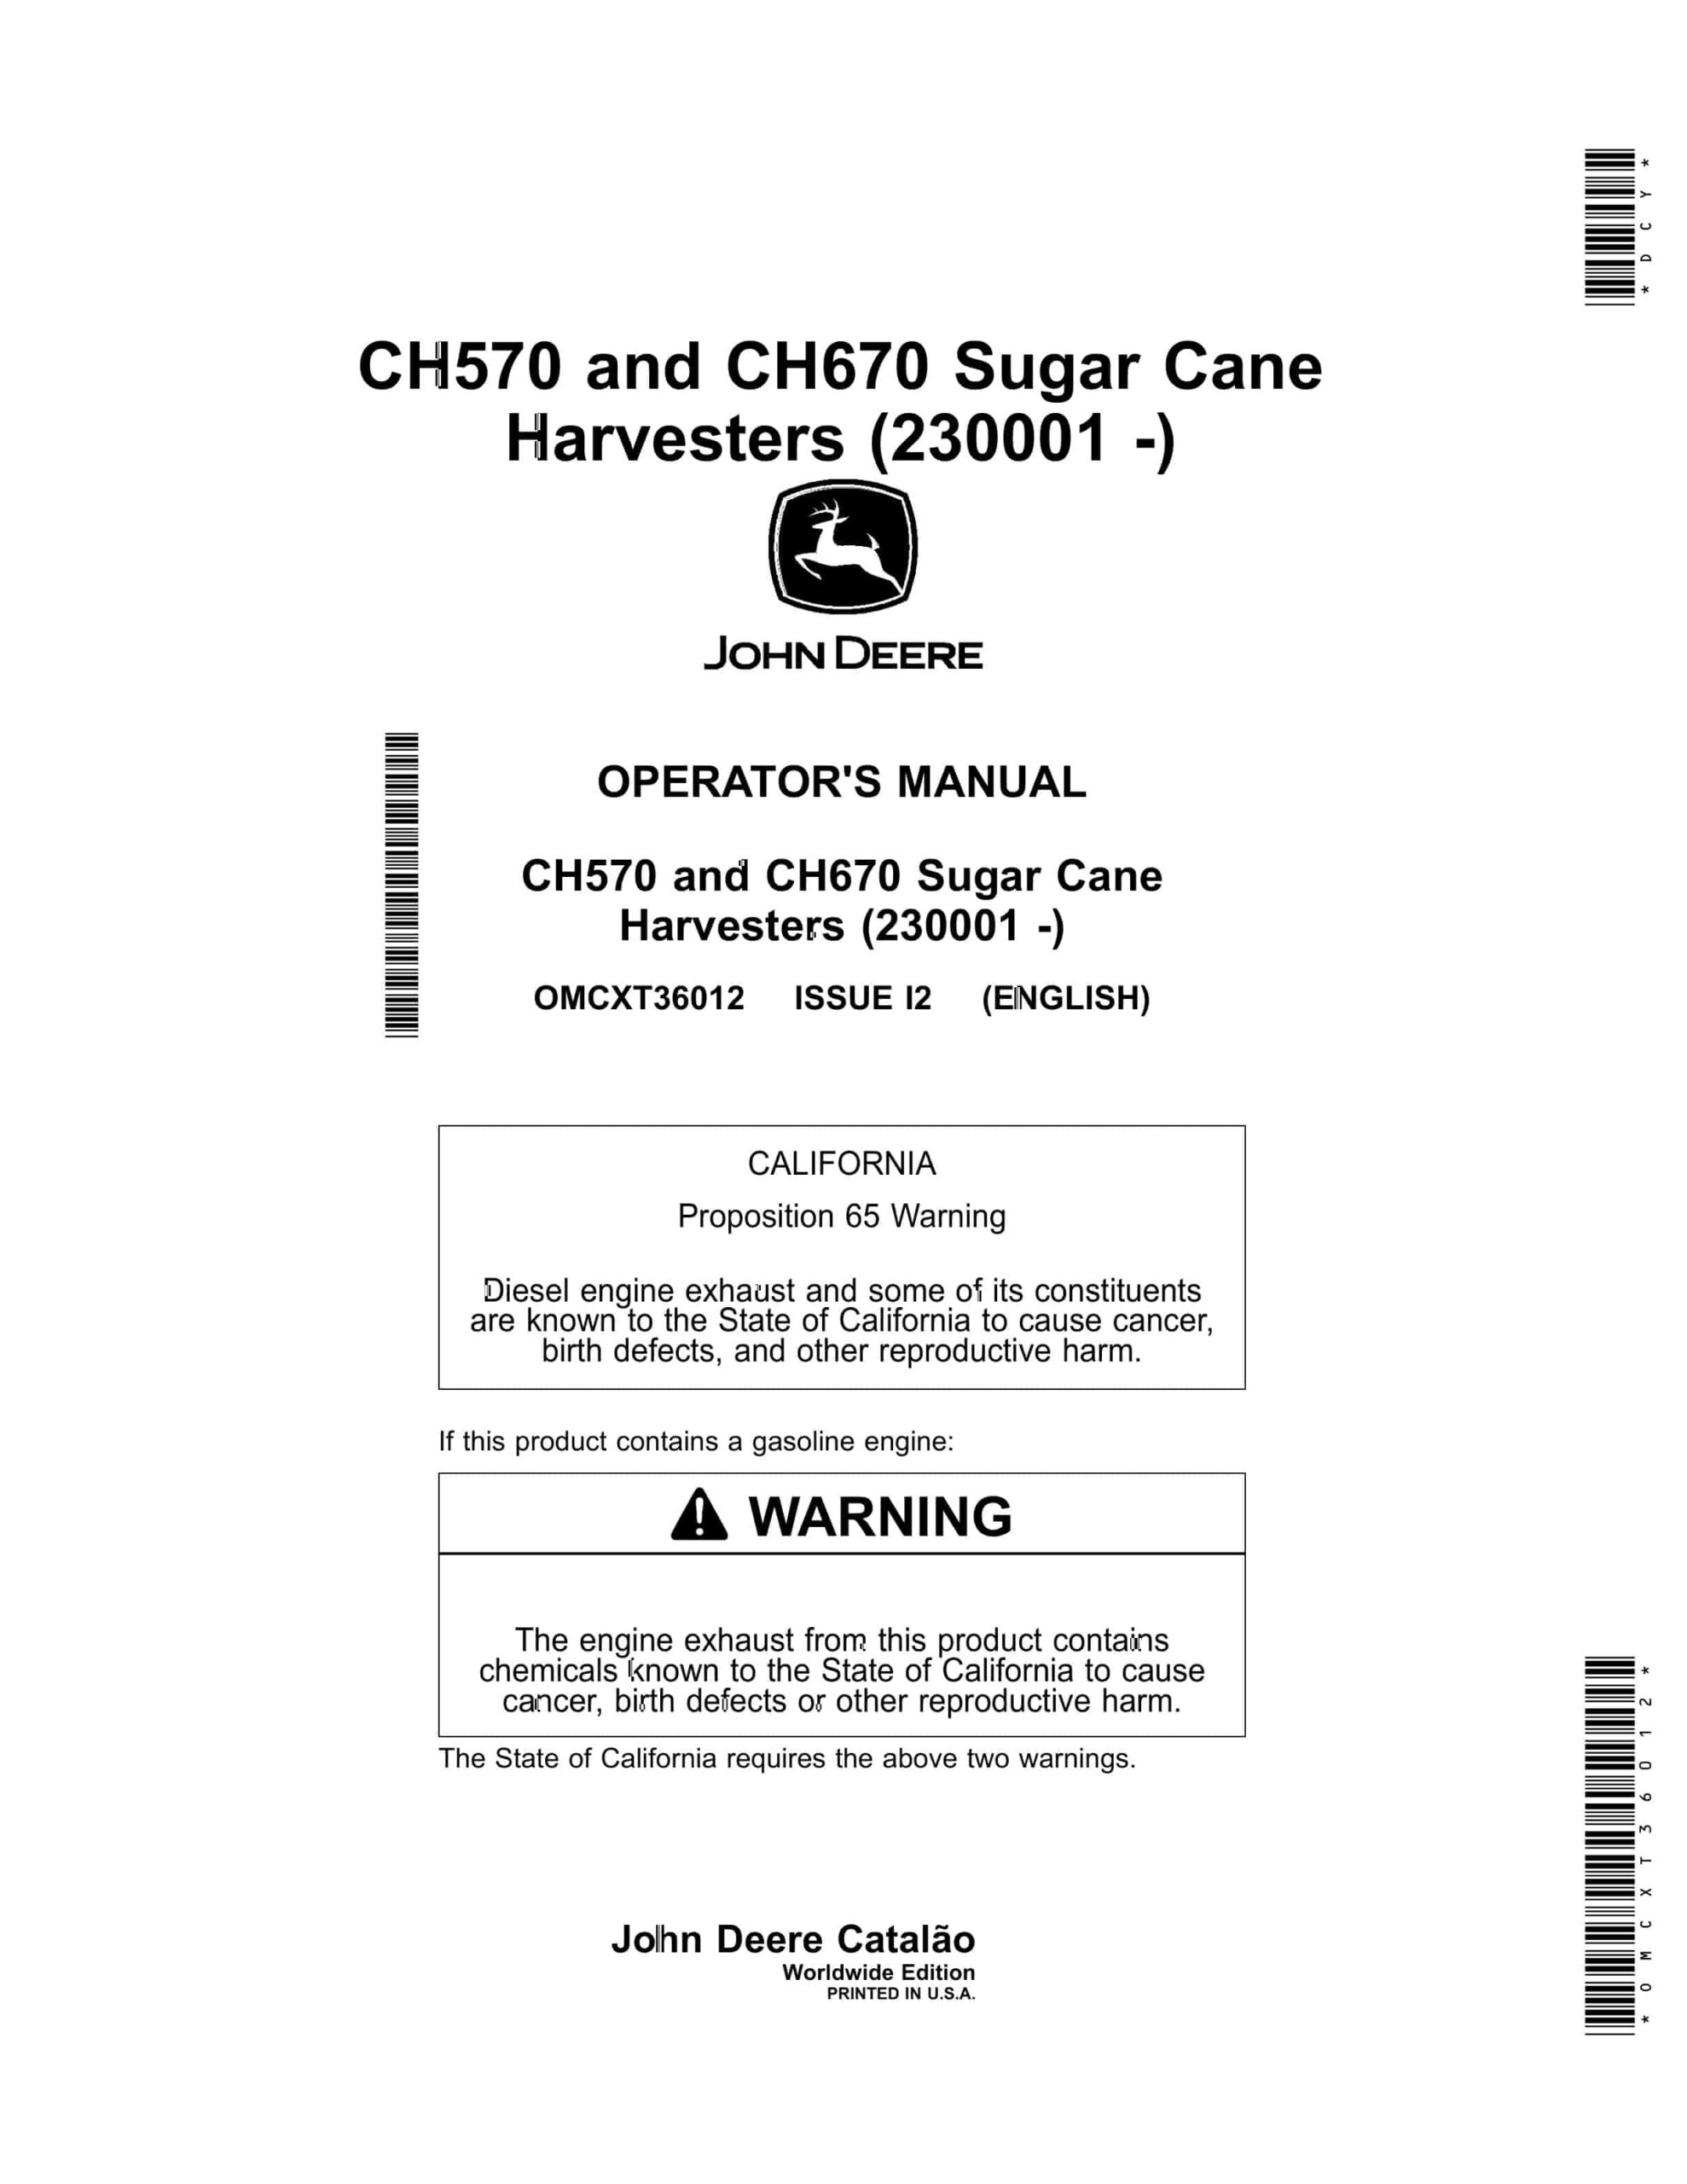 John Deere CH570 and CH670 Sugar Cane Harvesters Operator Manual OMCXT36012-1